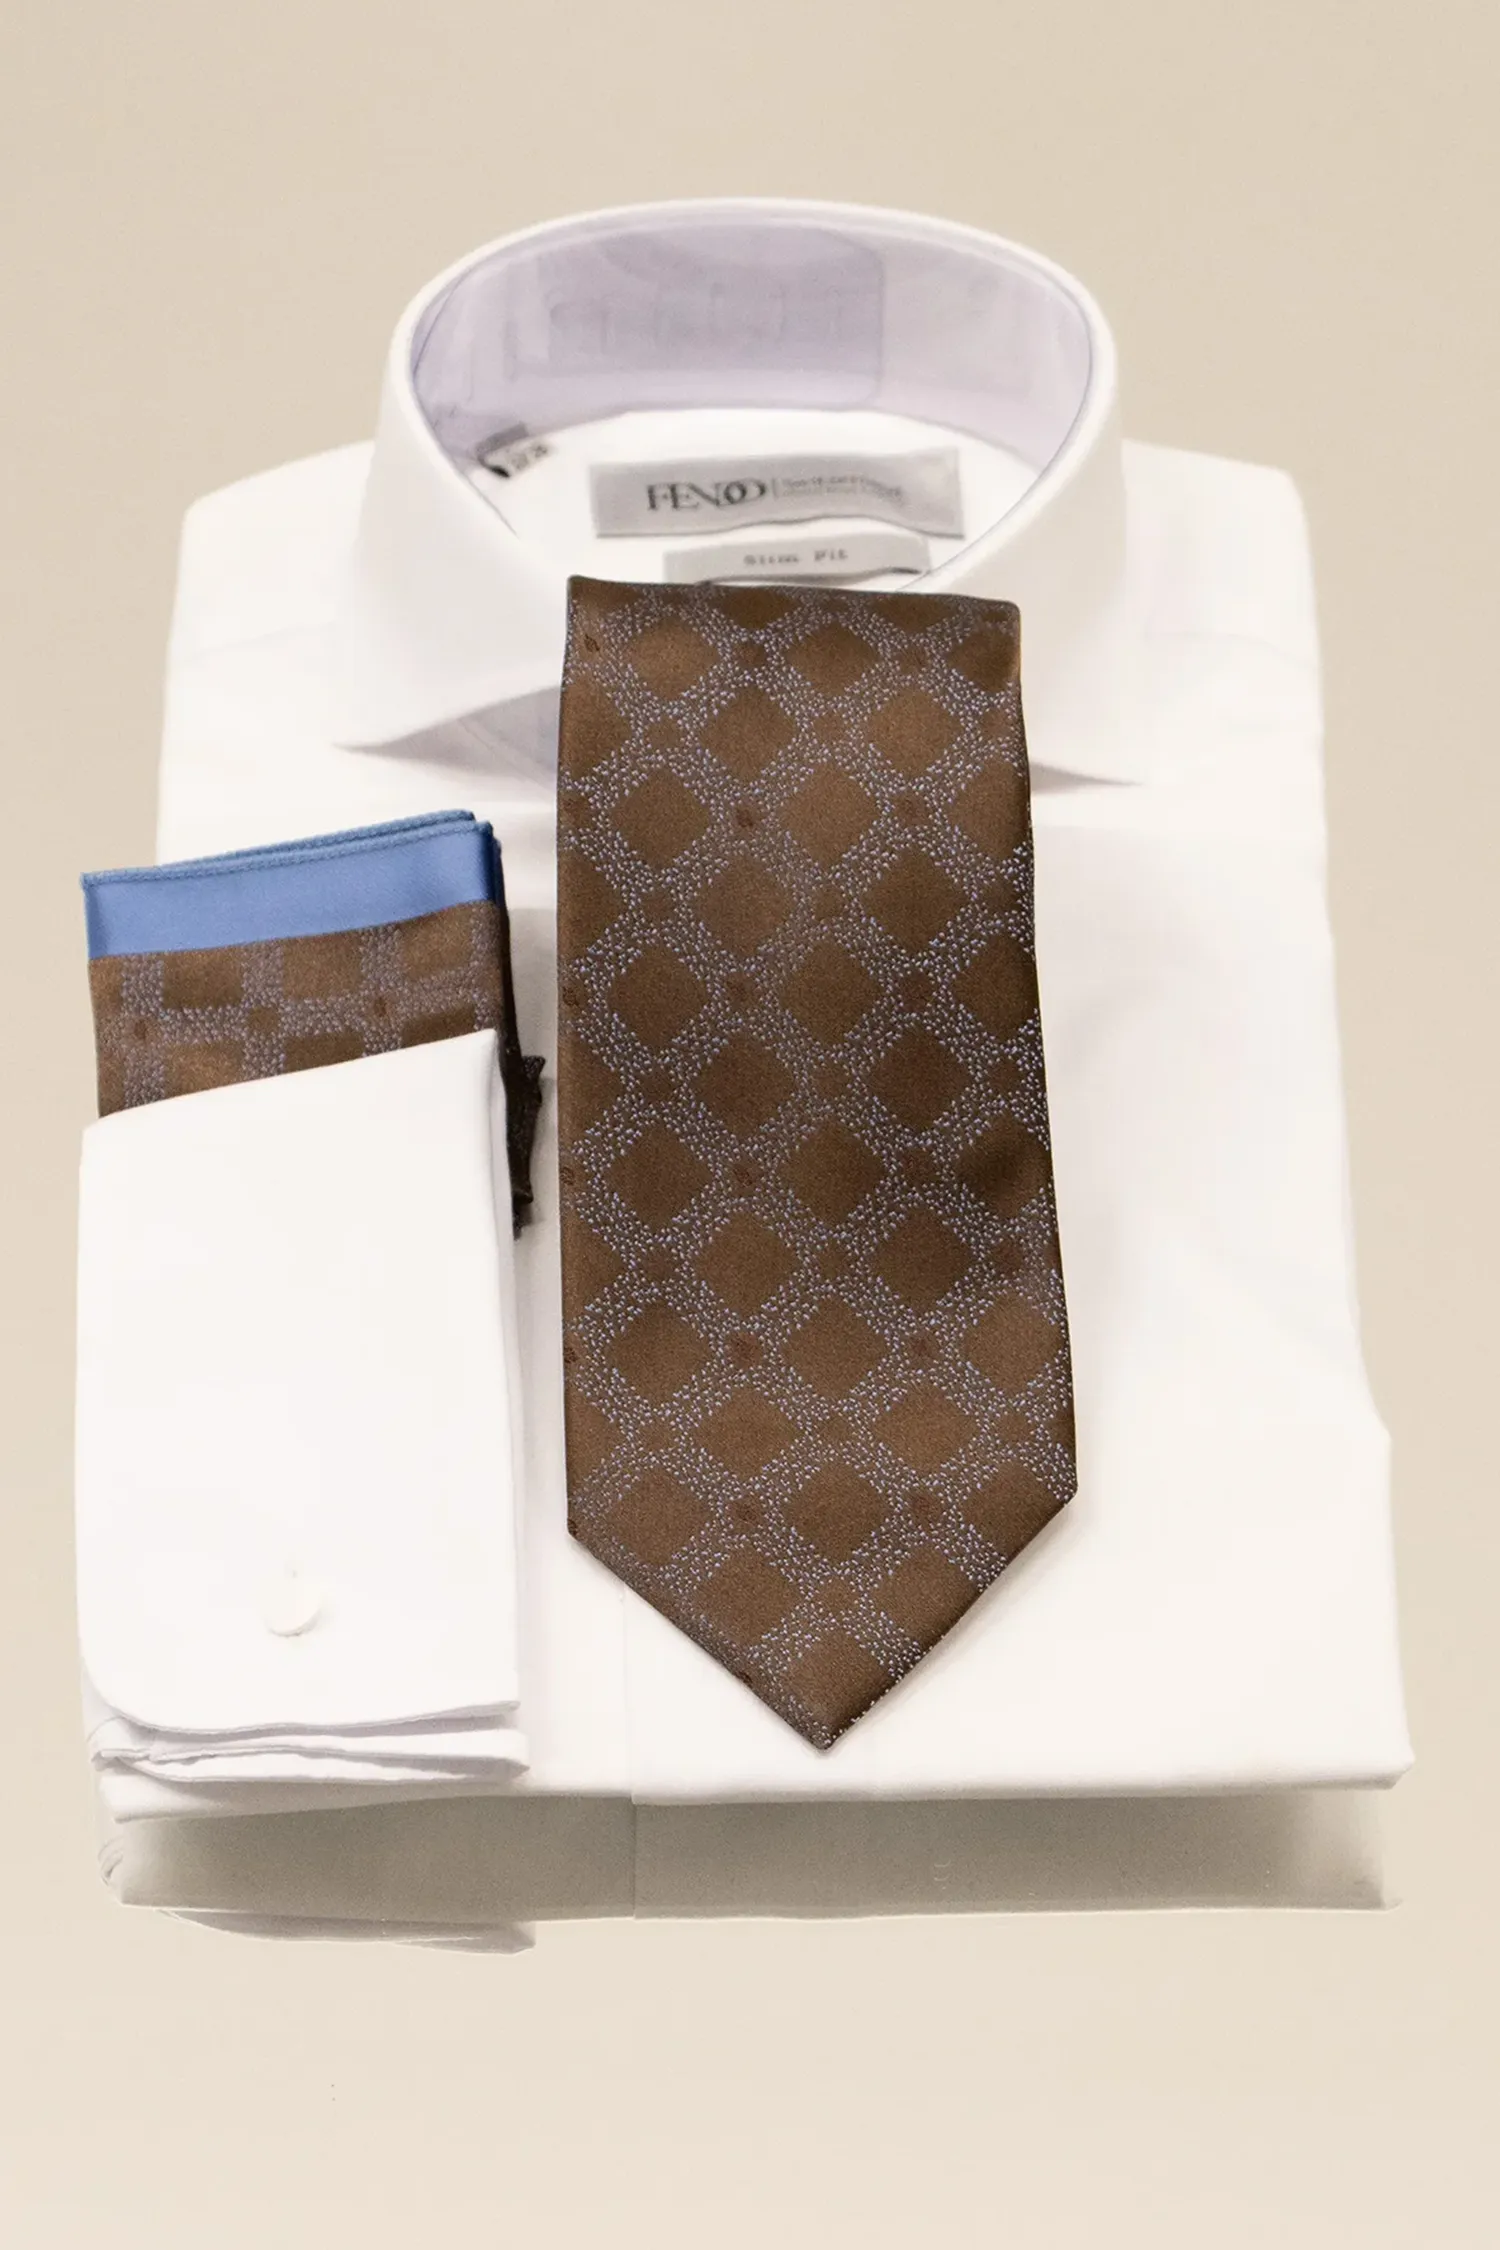 Geometric pattern tie and handkerchief, brown in color